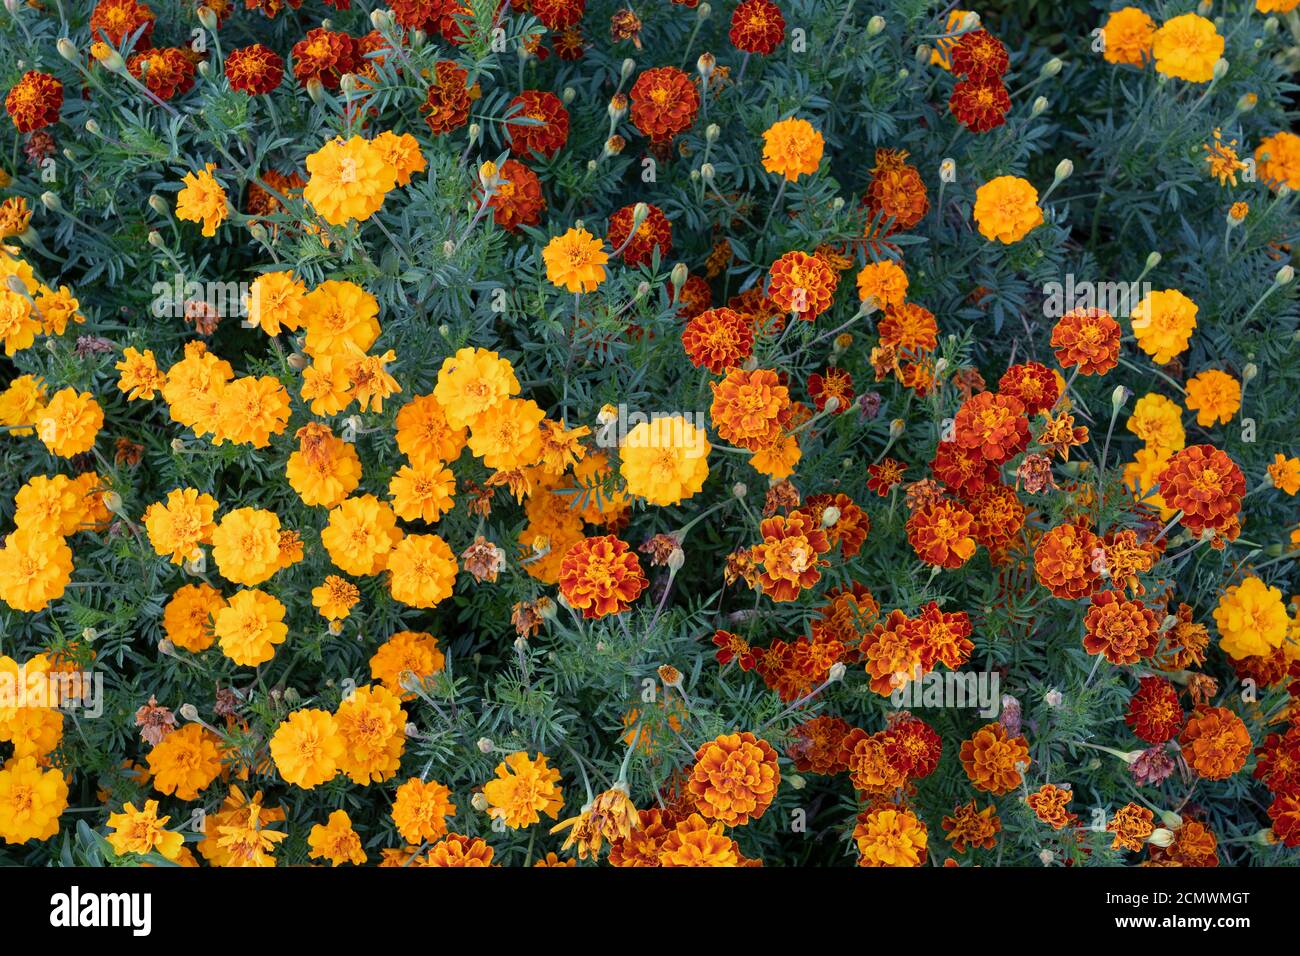 A mix of red, orange and yellow Tagetes patula ‘Honeycomb’ and Dwarf Anenome flowers - French Marigolds from the family Asteraceae Stock Photo